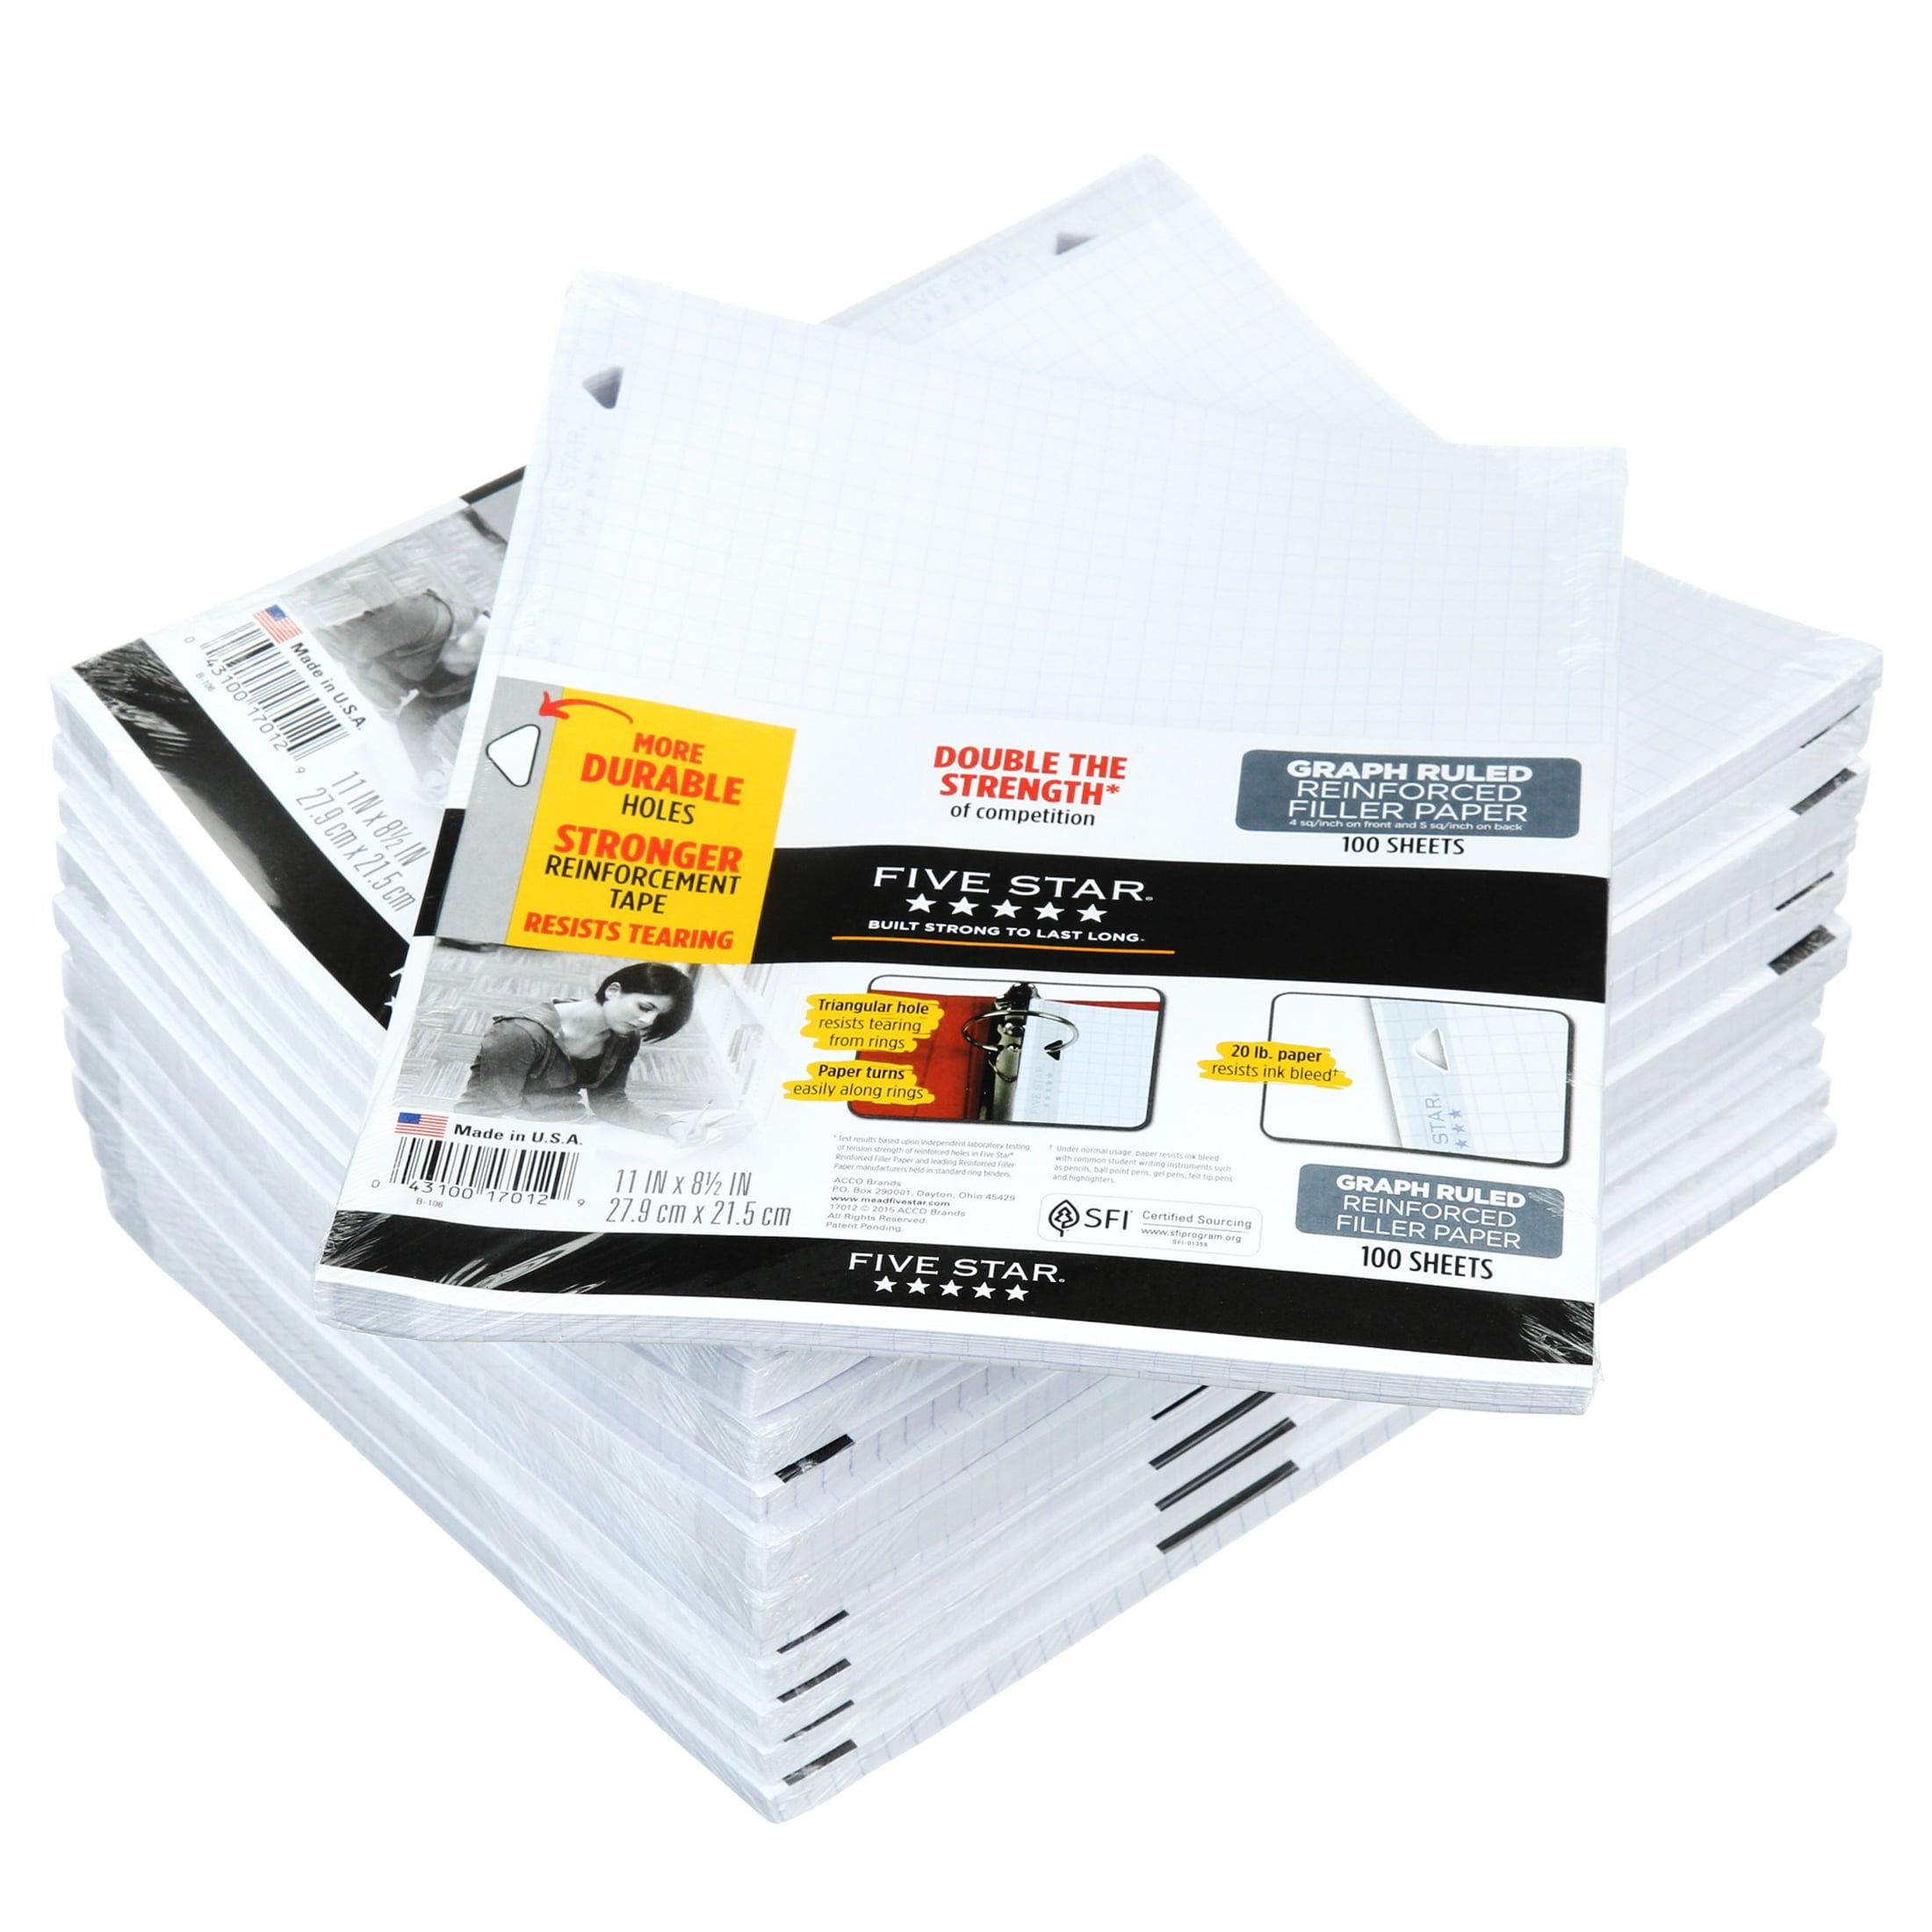 Five Star Reinforced Graph Ruled Filler Paper, Insertable, 75ct (17018)